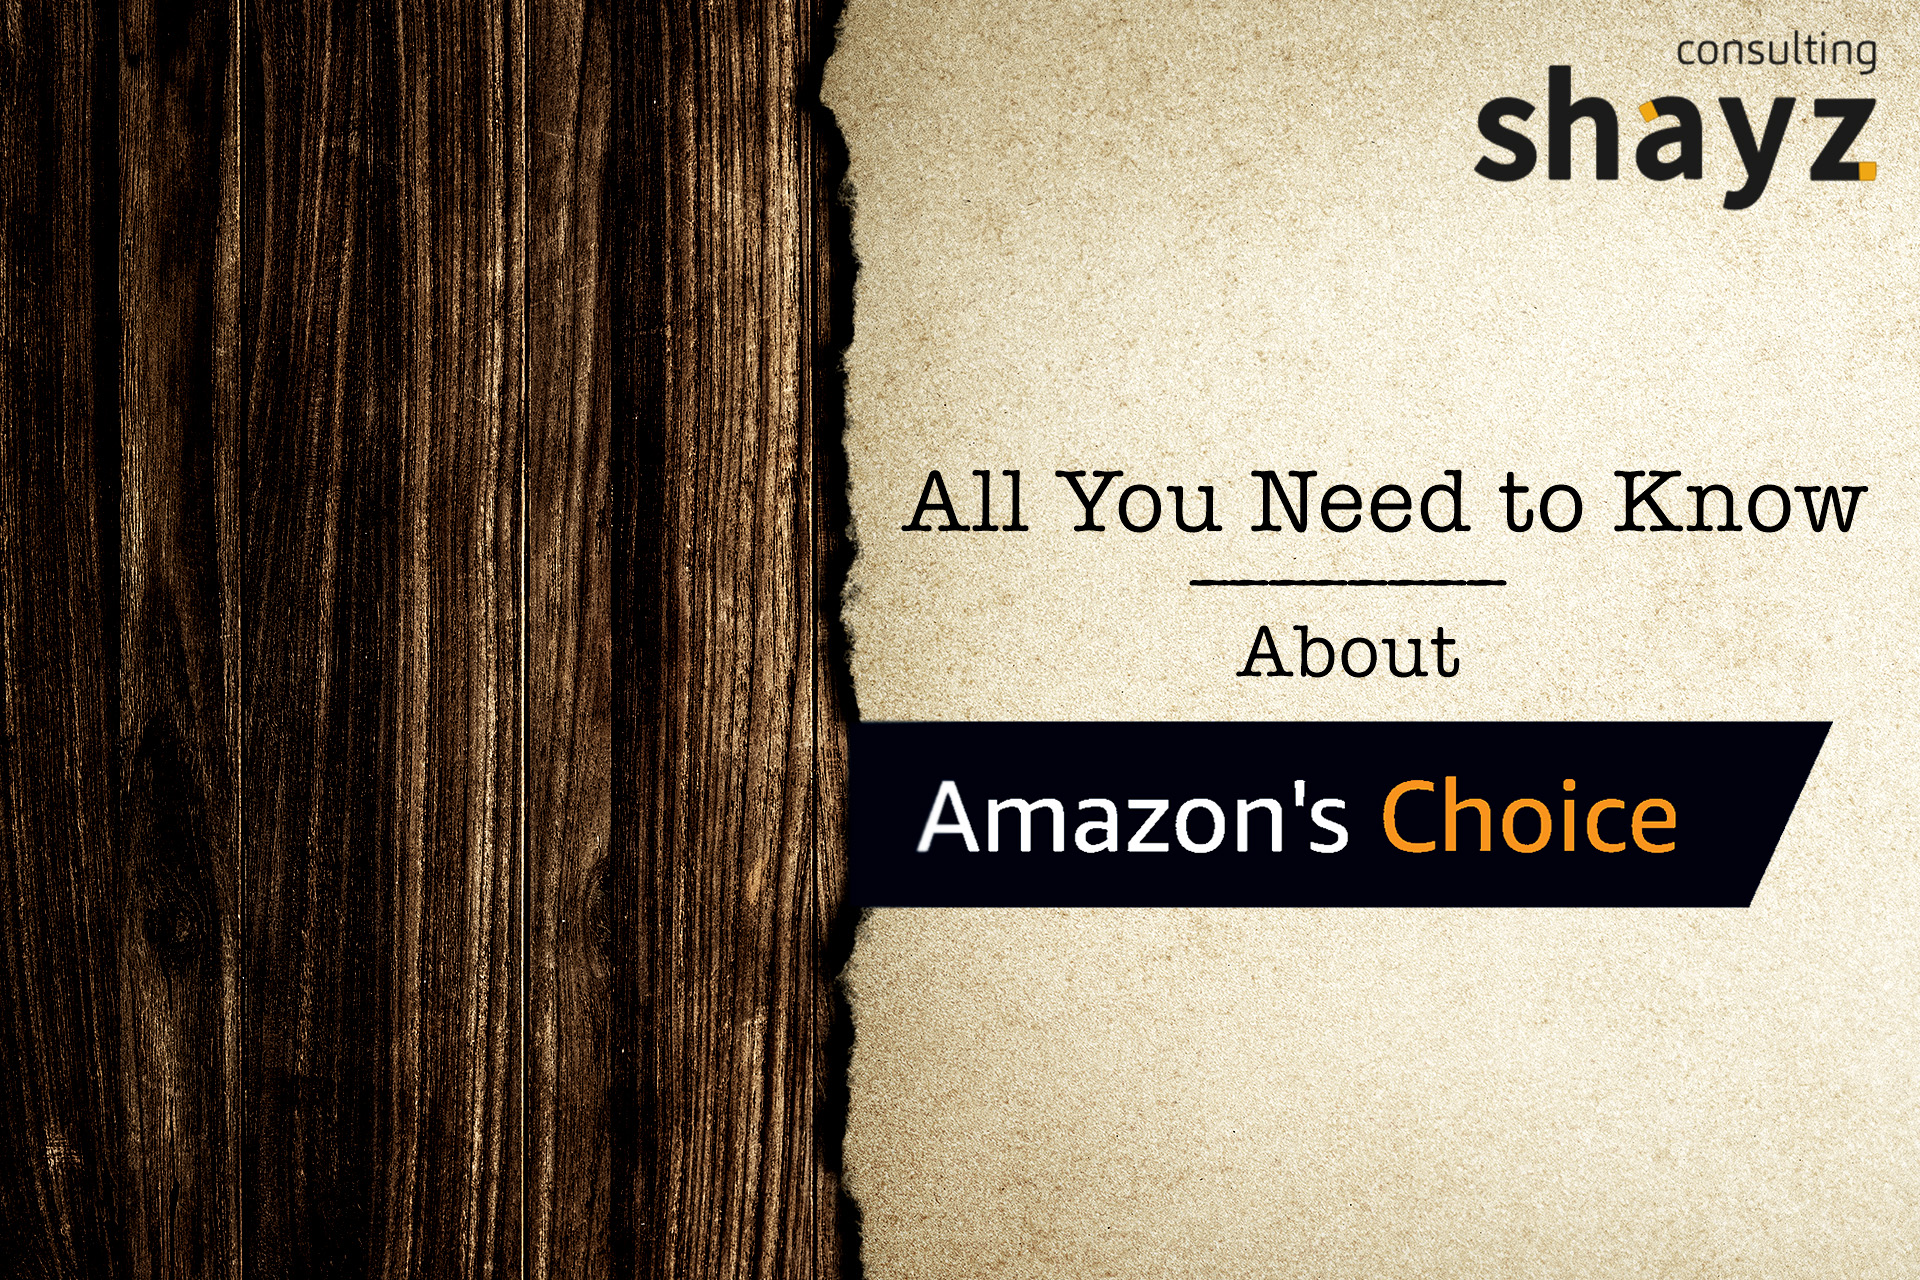 All You Need to Know about “Amazon’s Choice”